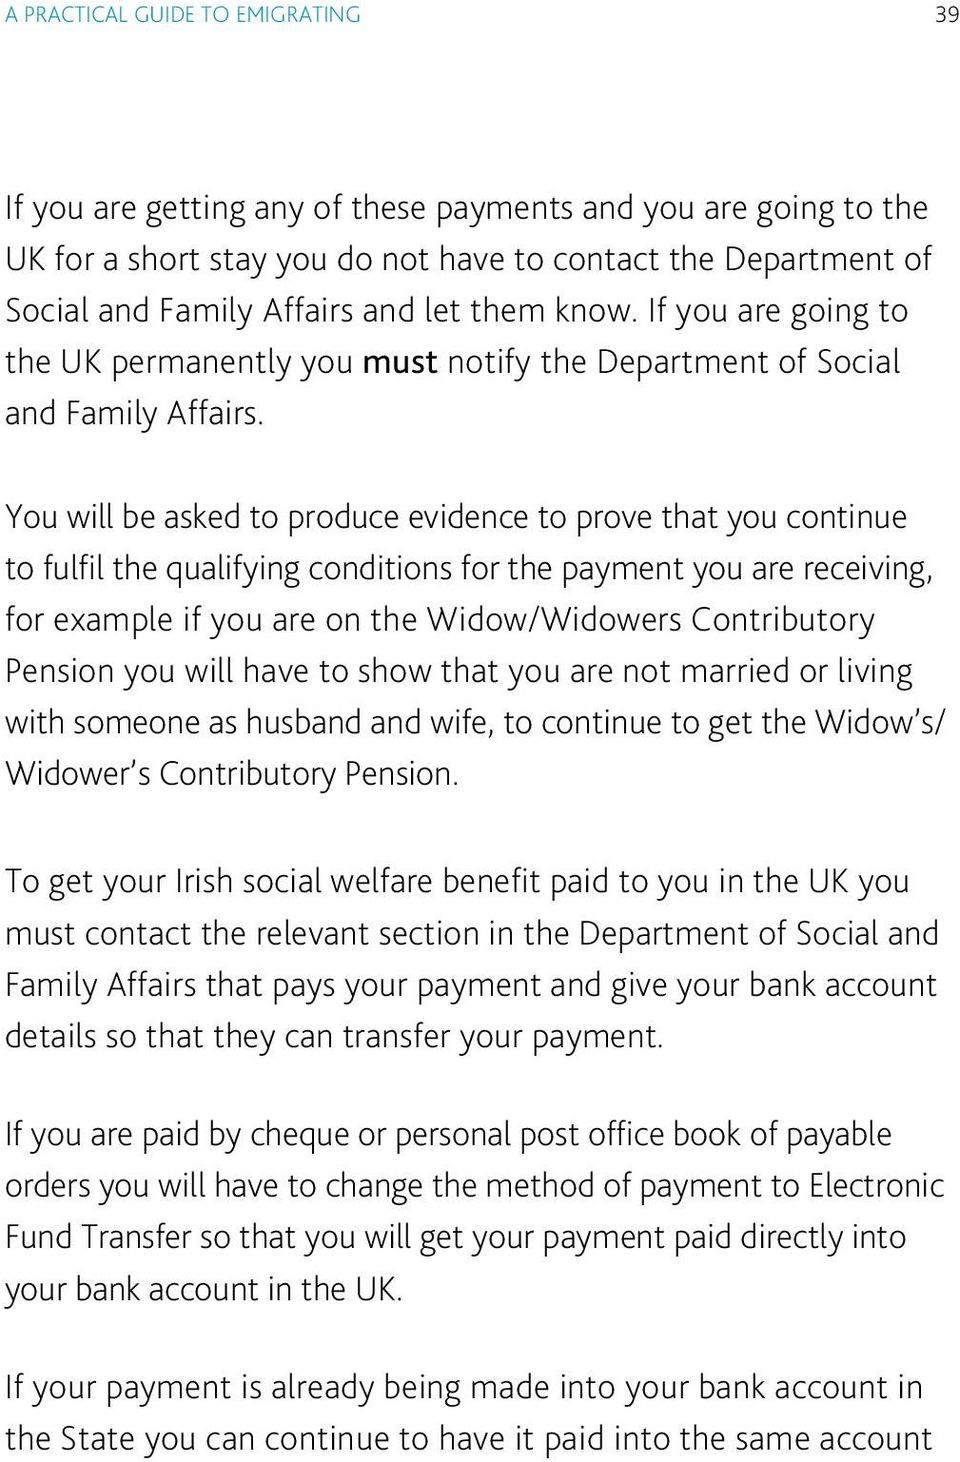 You will be asked to produce evidence to prove that you continue to fulfil the qualifying conditions for the payment you are receiving, for example if you are on the Widow/Widowers Contributory